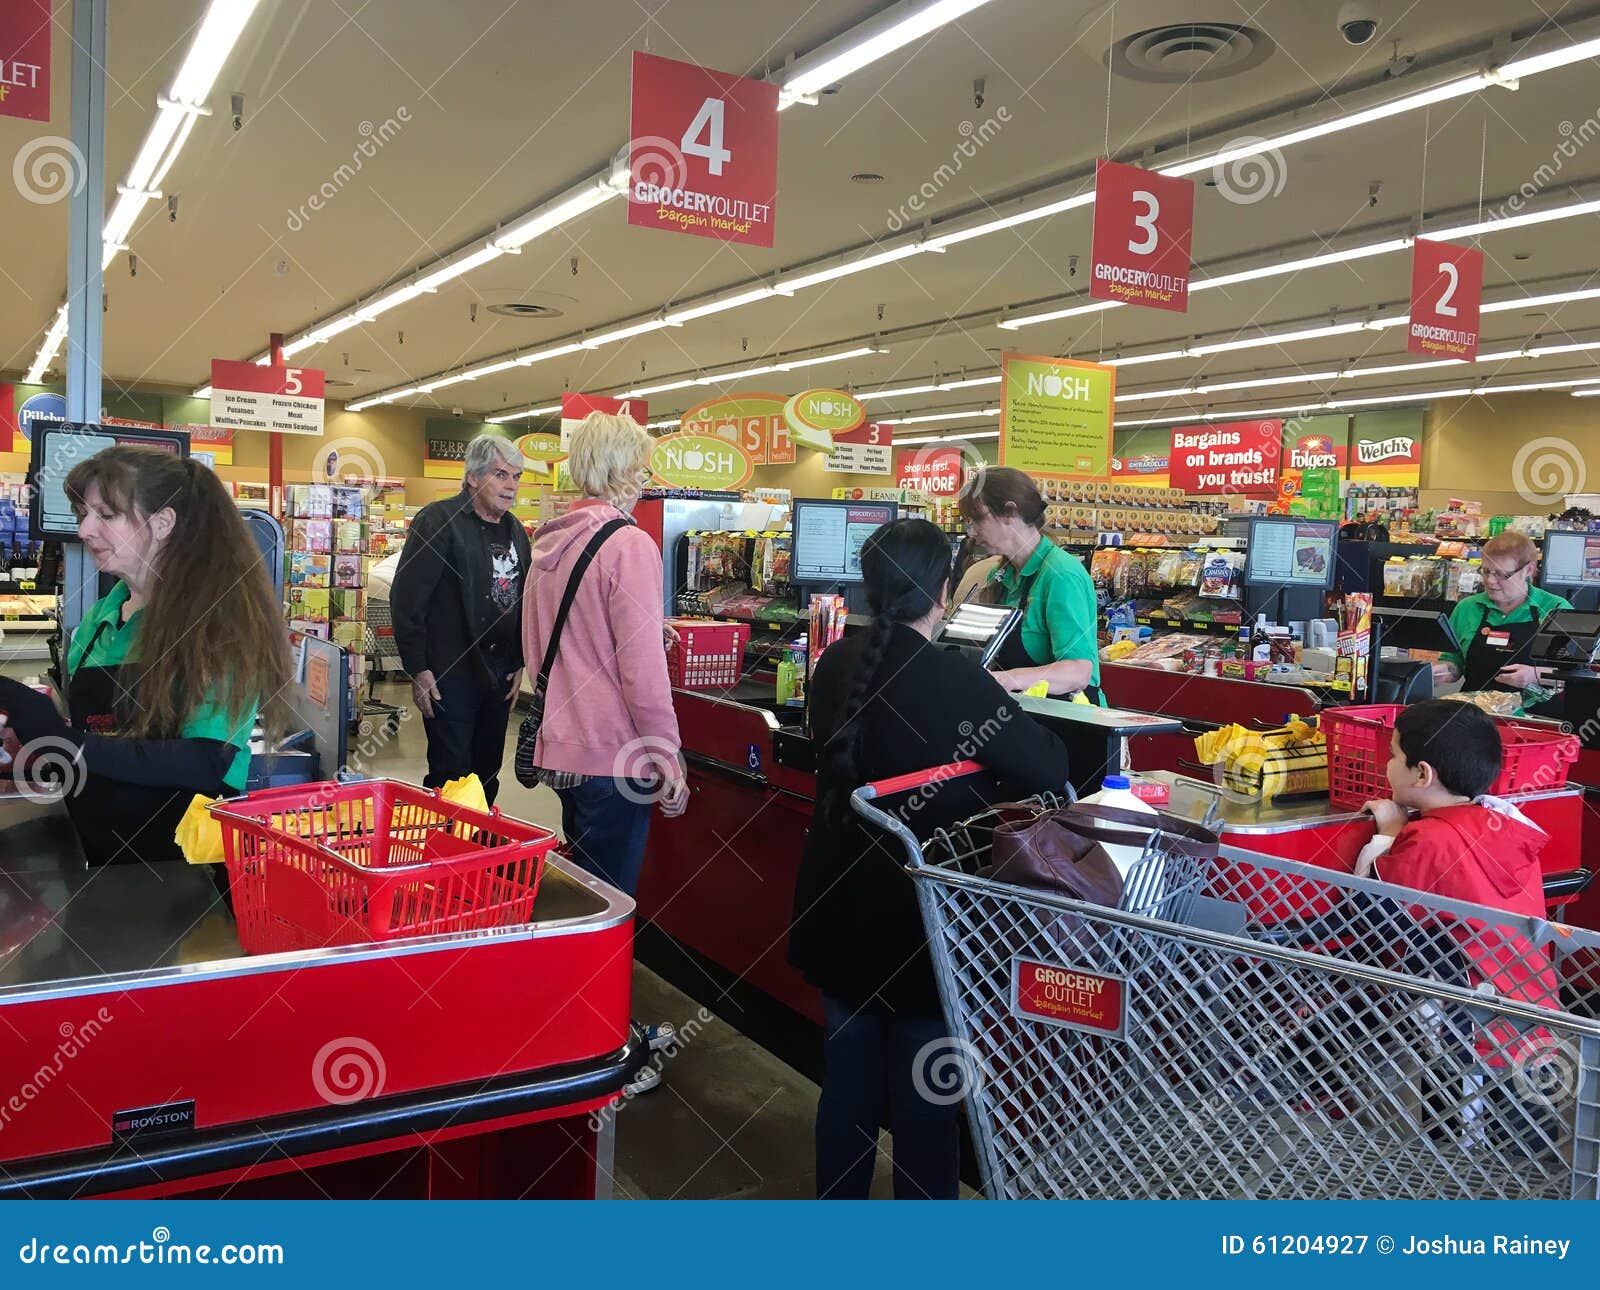 Checkout Line at Grocery Outlet Store Editorial Photography Image of